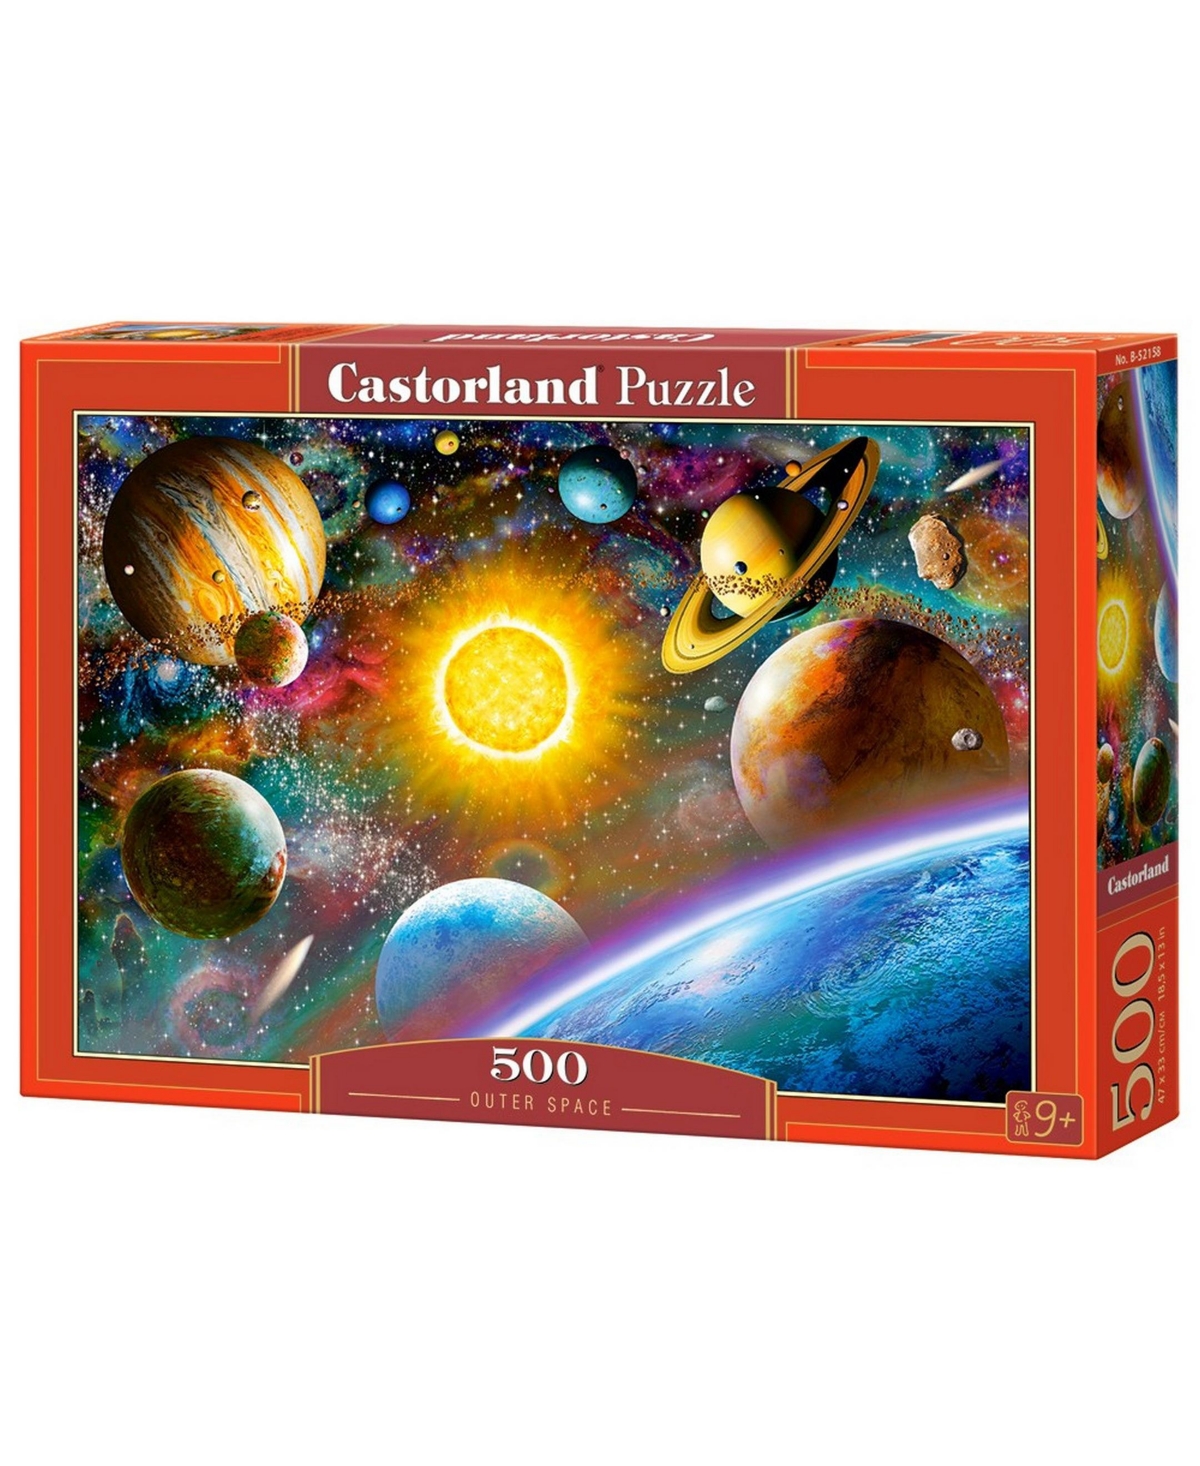 Castorland Outer Space Jigsaw Puzzle Set, 500 Piece In Multicolor